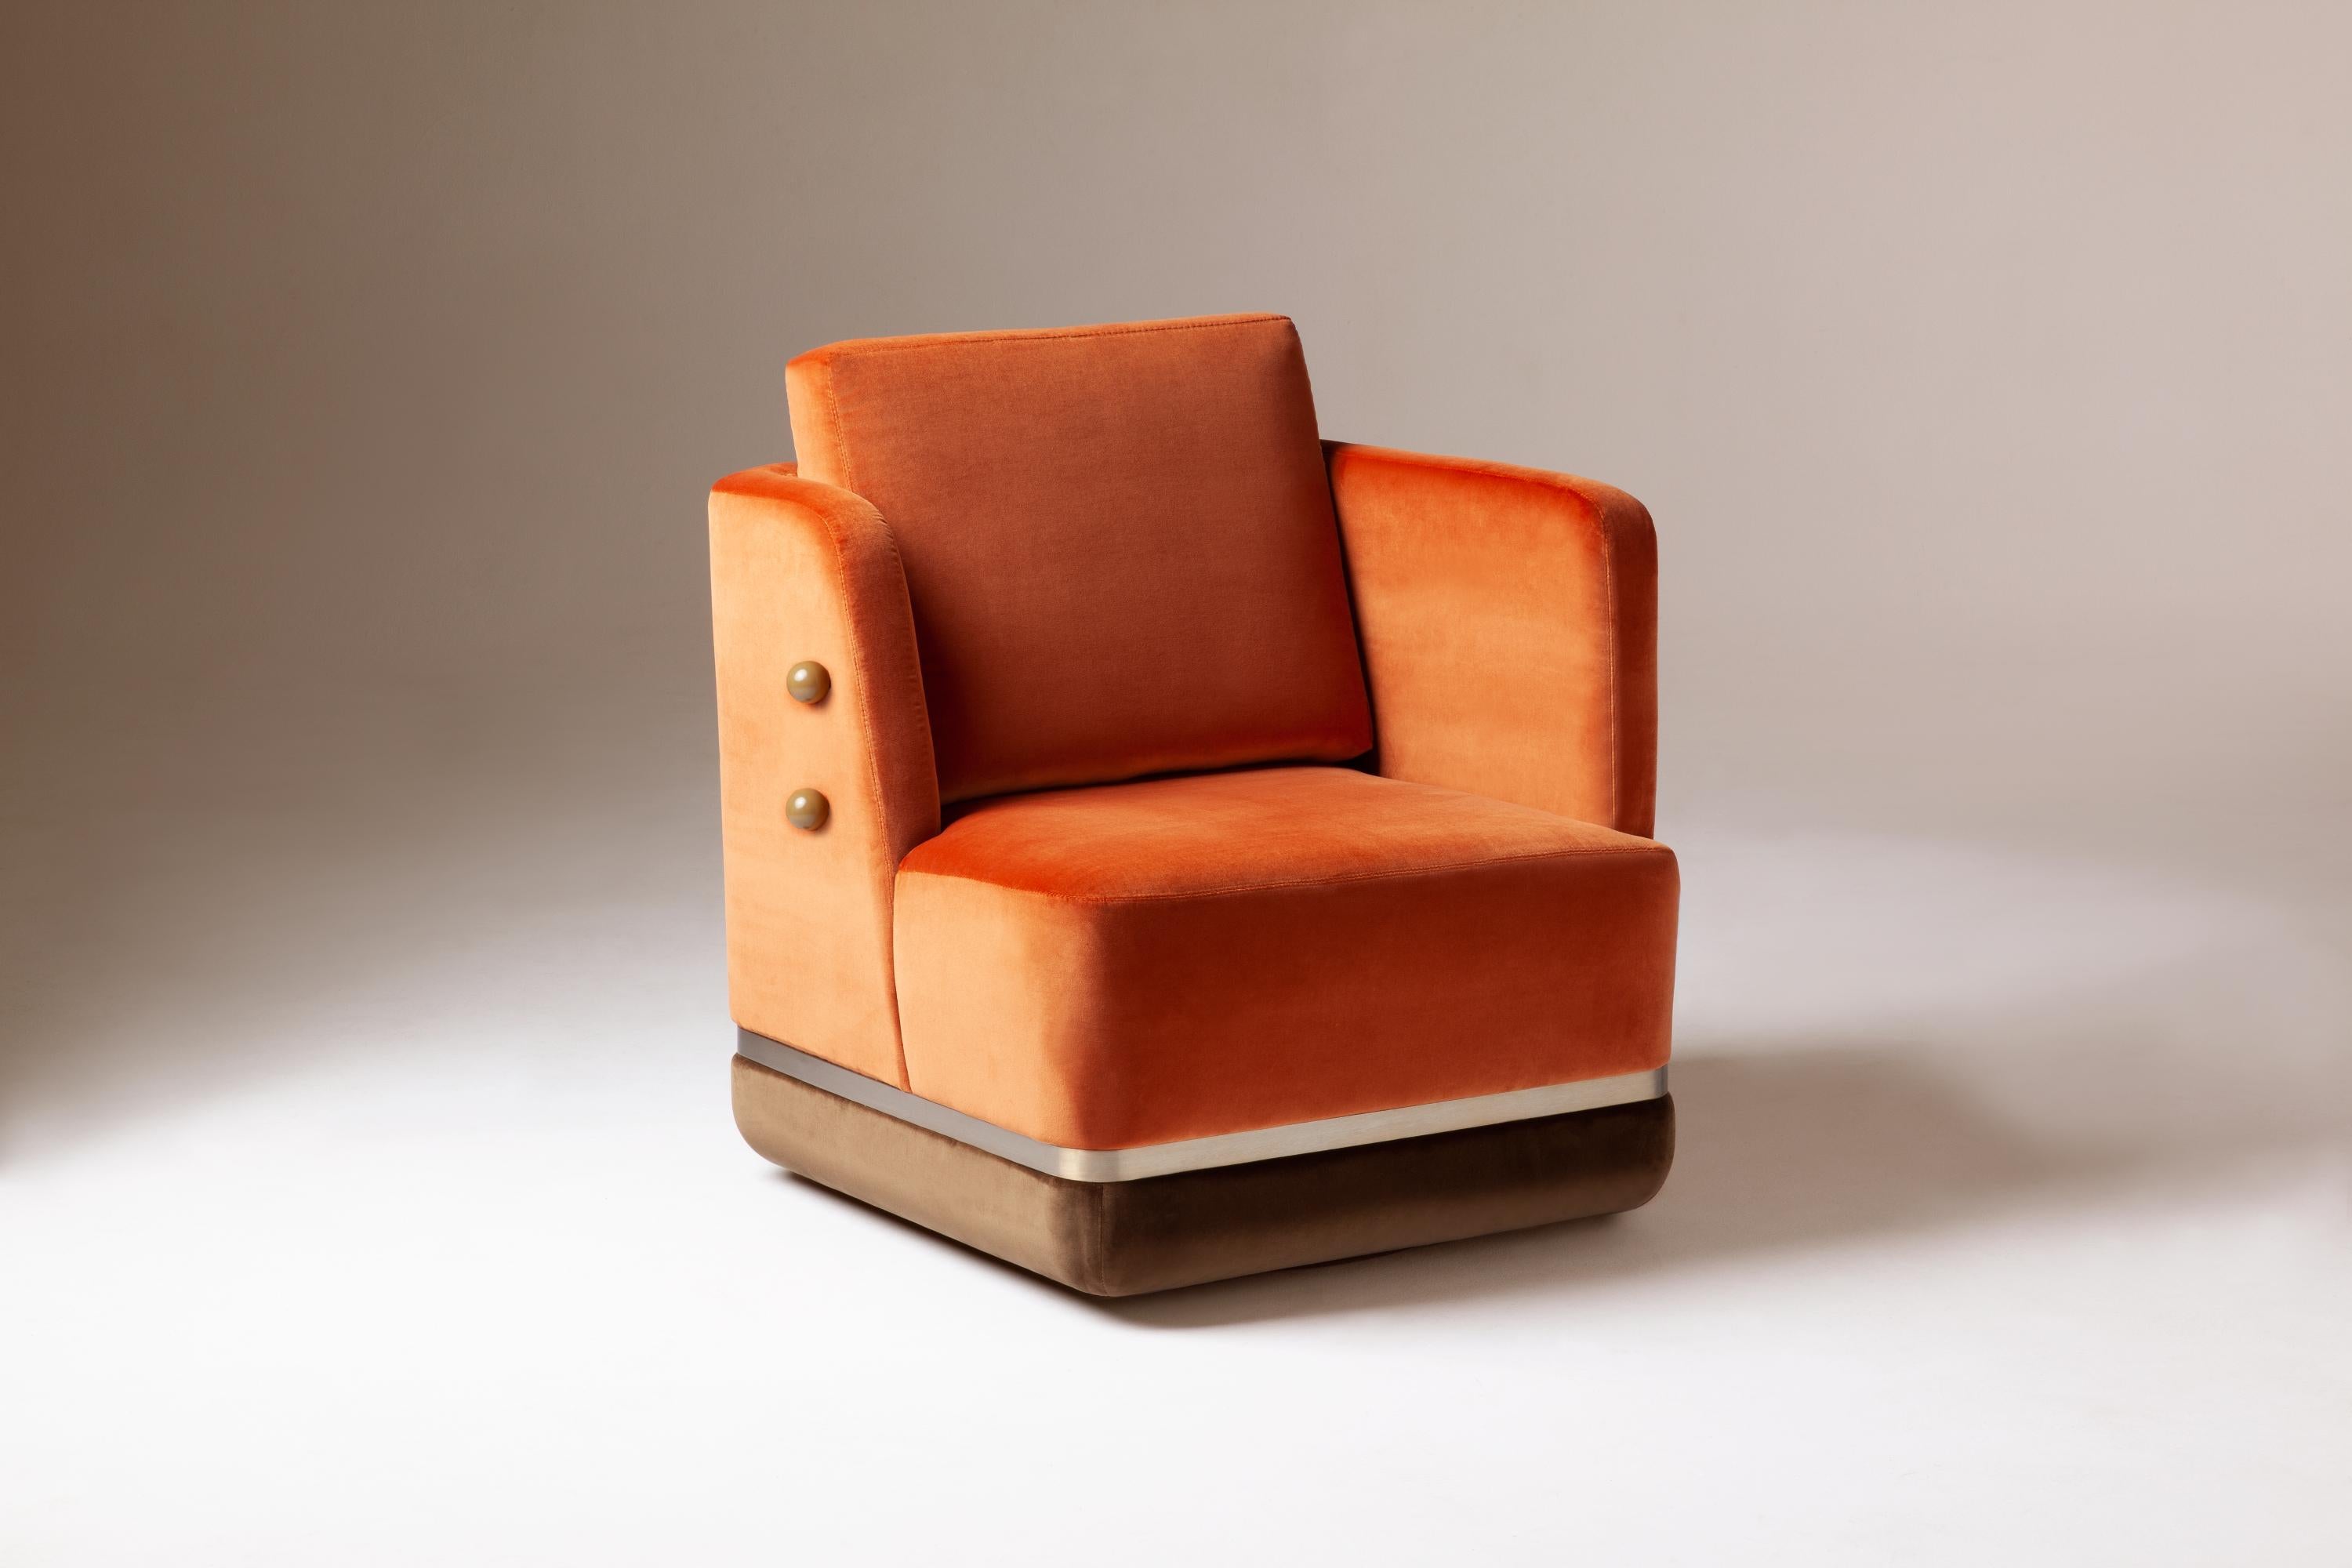 Panorama armchair by Dooq
Materials: Lacquered MDF, Fabric, Leather, Stainless Steel
Dimensions: W 69 x D 73 x H 86 cm


Dooq is a design company dedicated to celebrate the luxury of living. Creating designs that stimulate the senses, whose